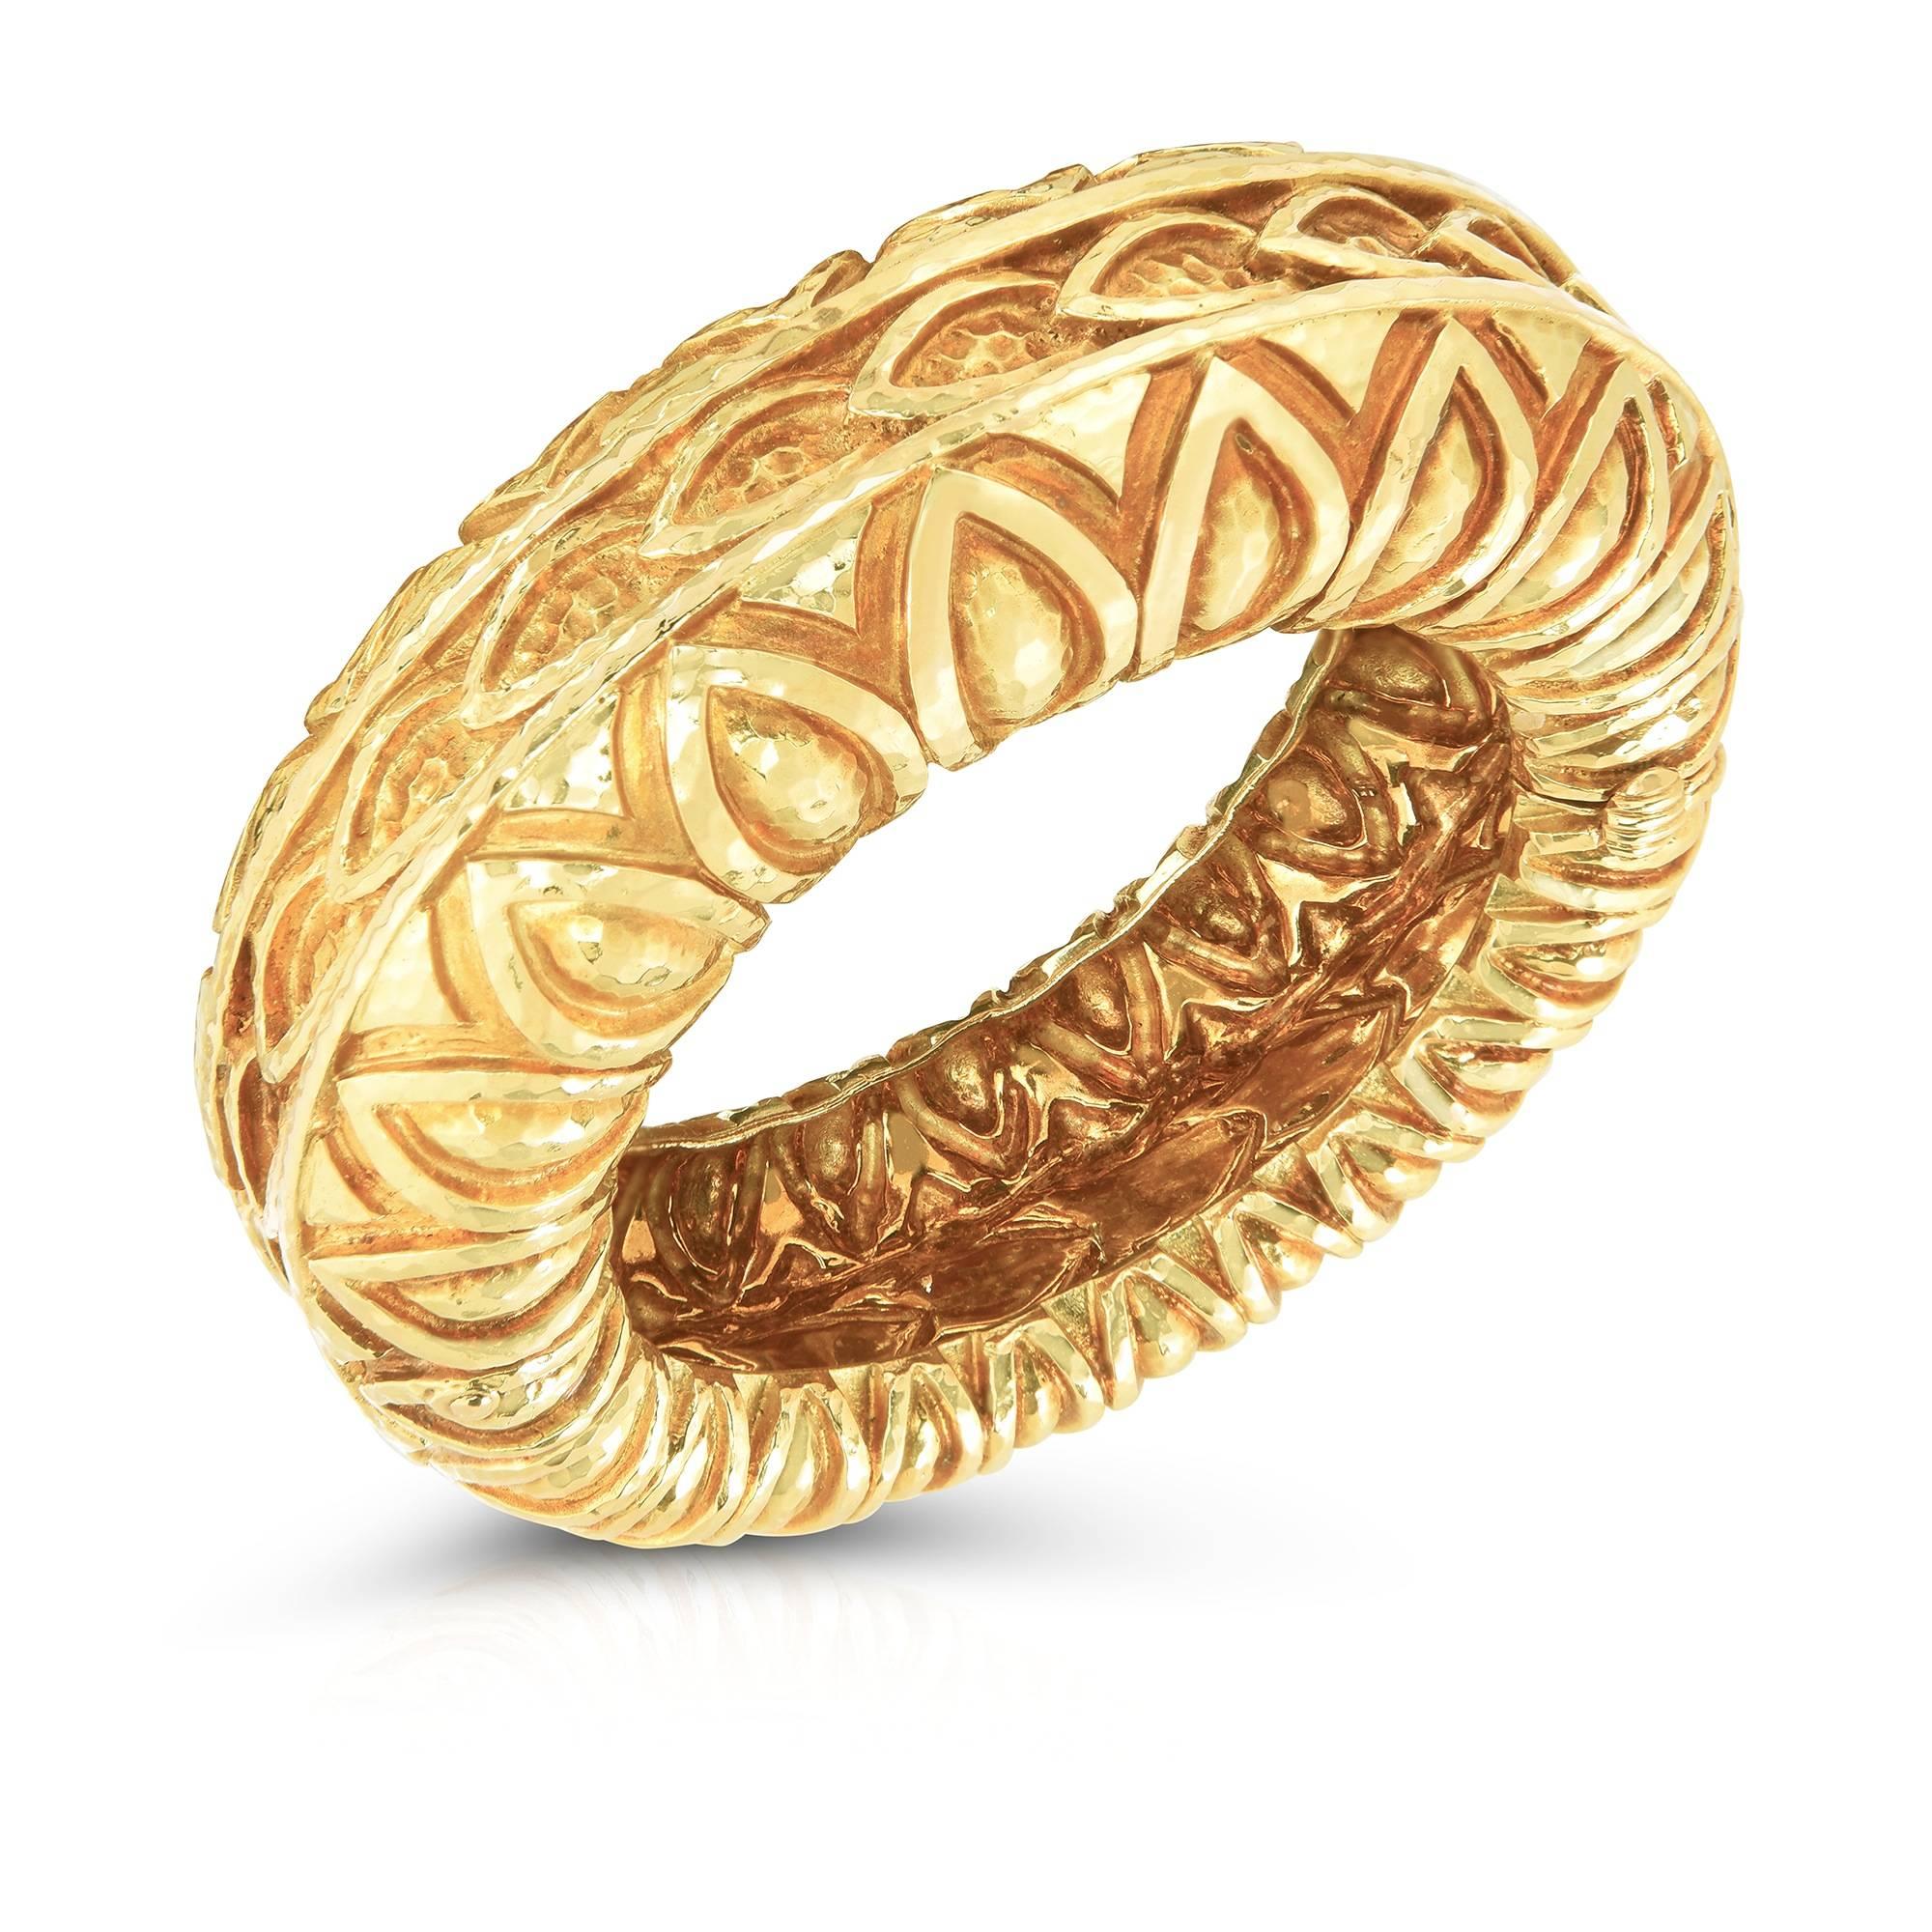 David Webb 18K Yellow Gold Bangle Bracelet
Beautiful Carved Designed with Hammered Texture
Solid 18K Yellow Gold
Hinged Clasp with Two Sided Release
Signed David Webb and Stamped 18K Yellow Gold
Includes Original Inner and Outer Boxes

